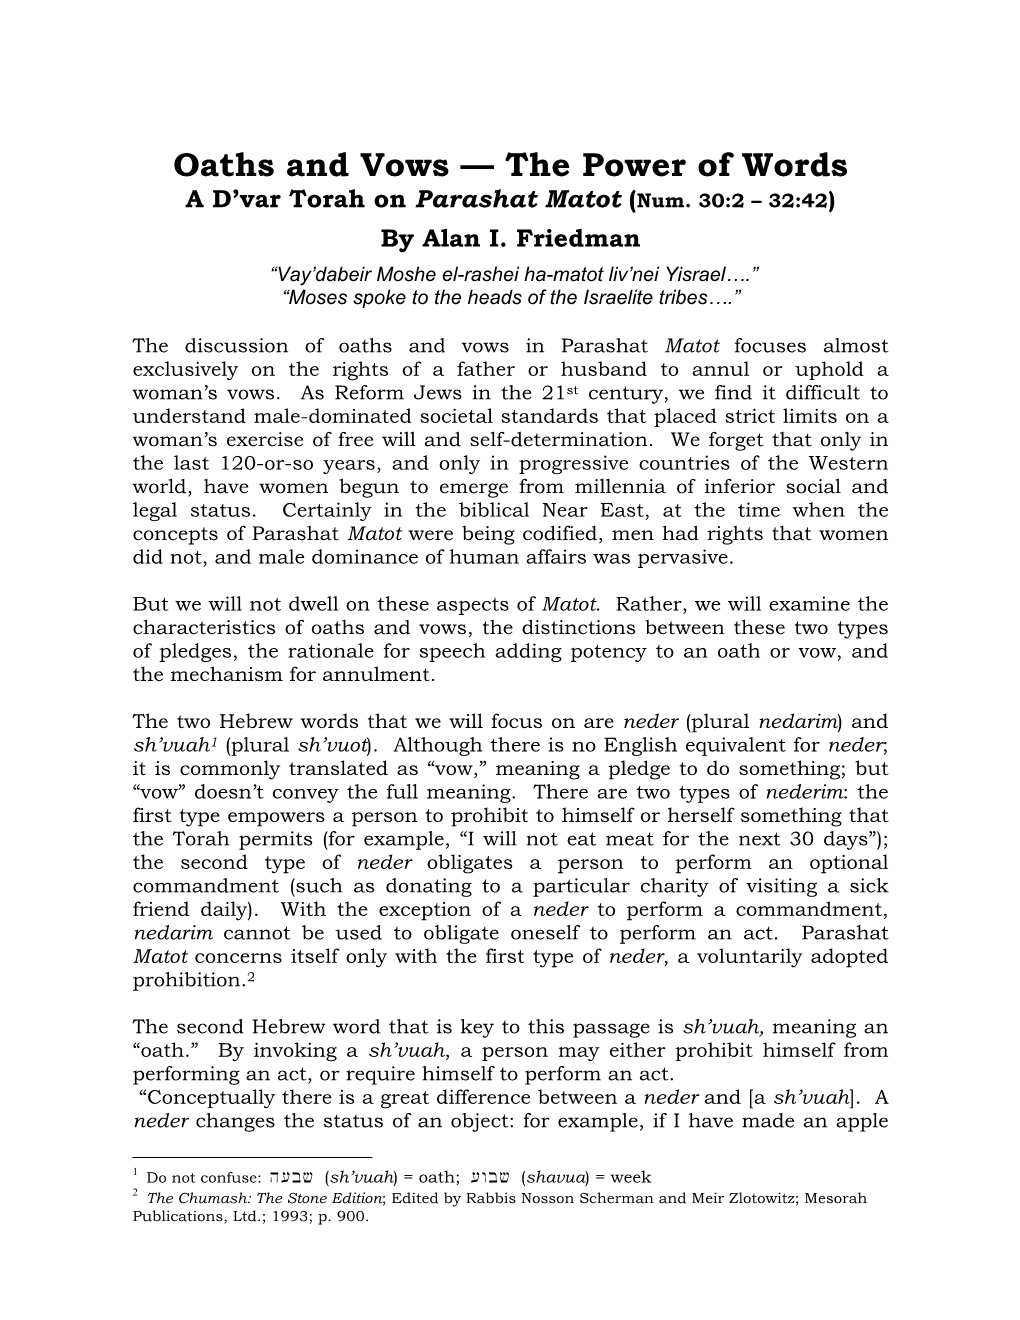 Oaths and Vows — the Power of Words a D’Var Torah on Parashat Matot (Num